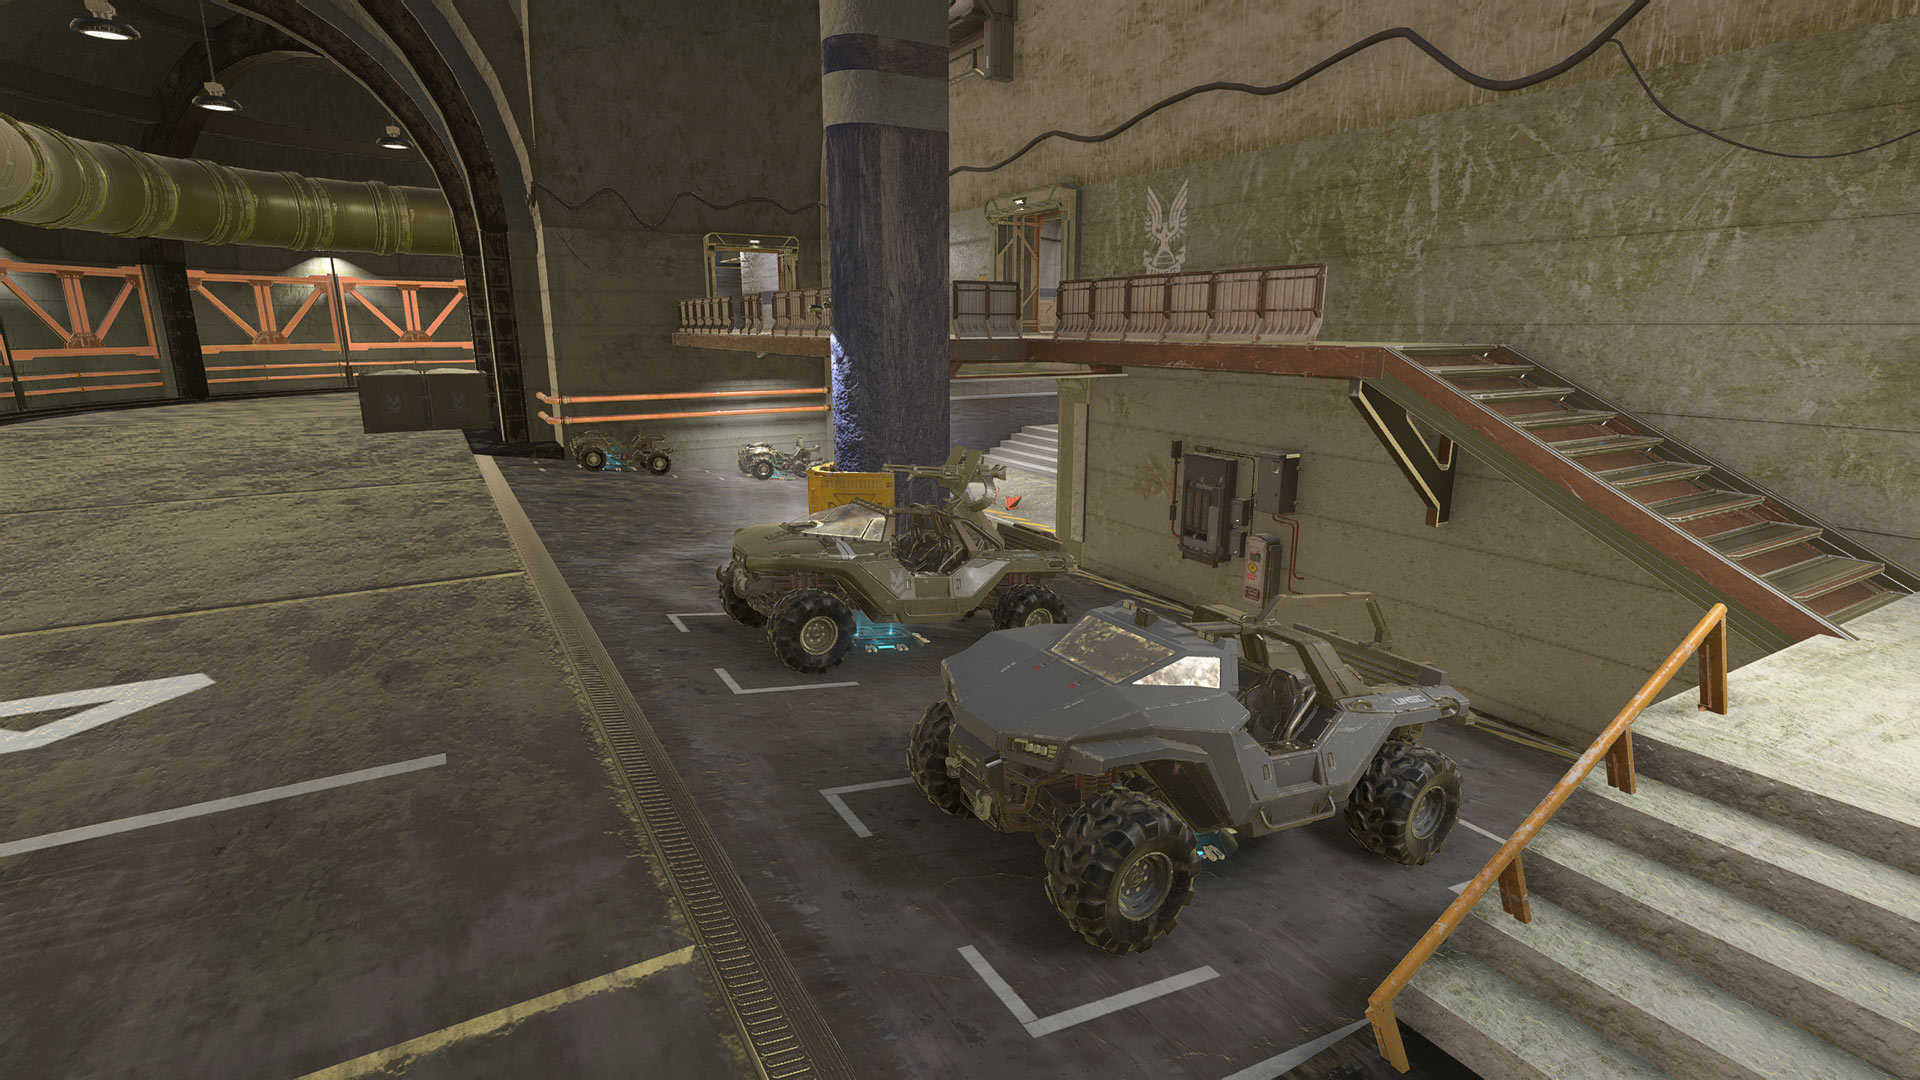 A Razorback and Warthog sit idle on a recreation of Halo 3's Rat's Nest.